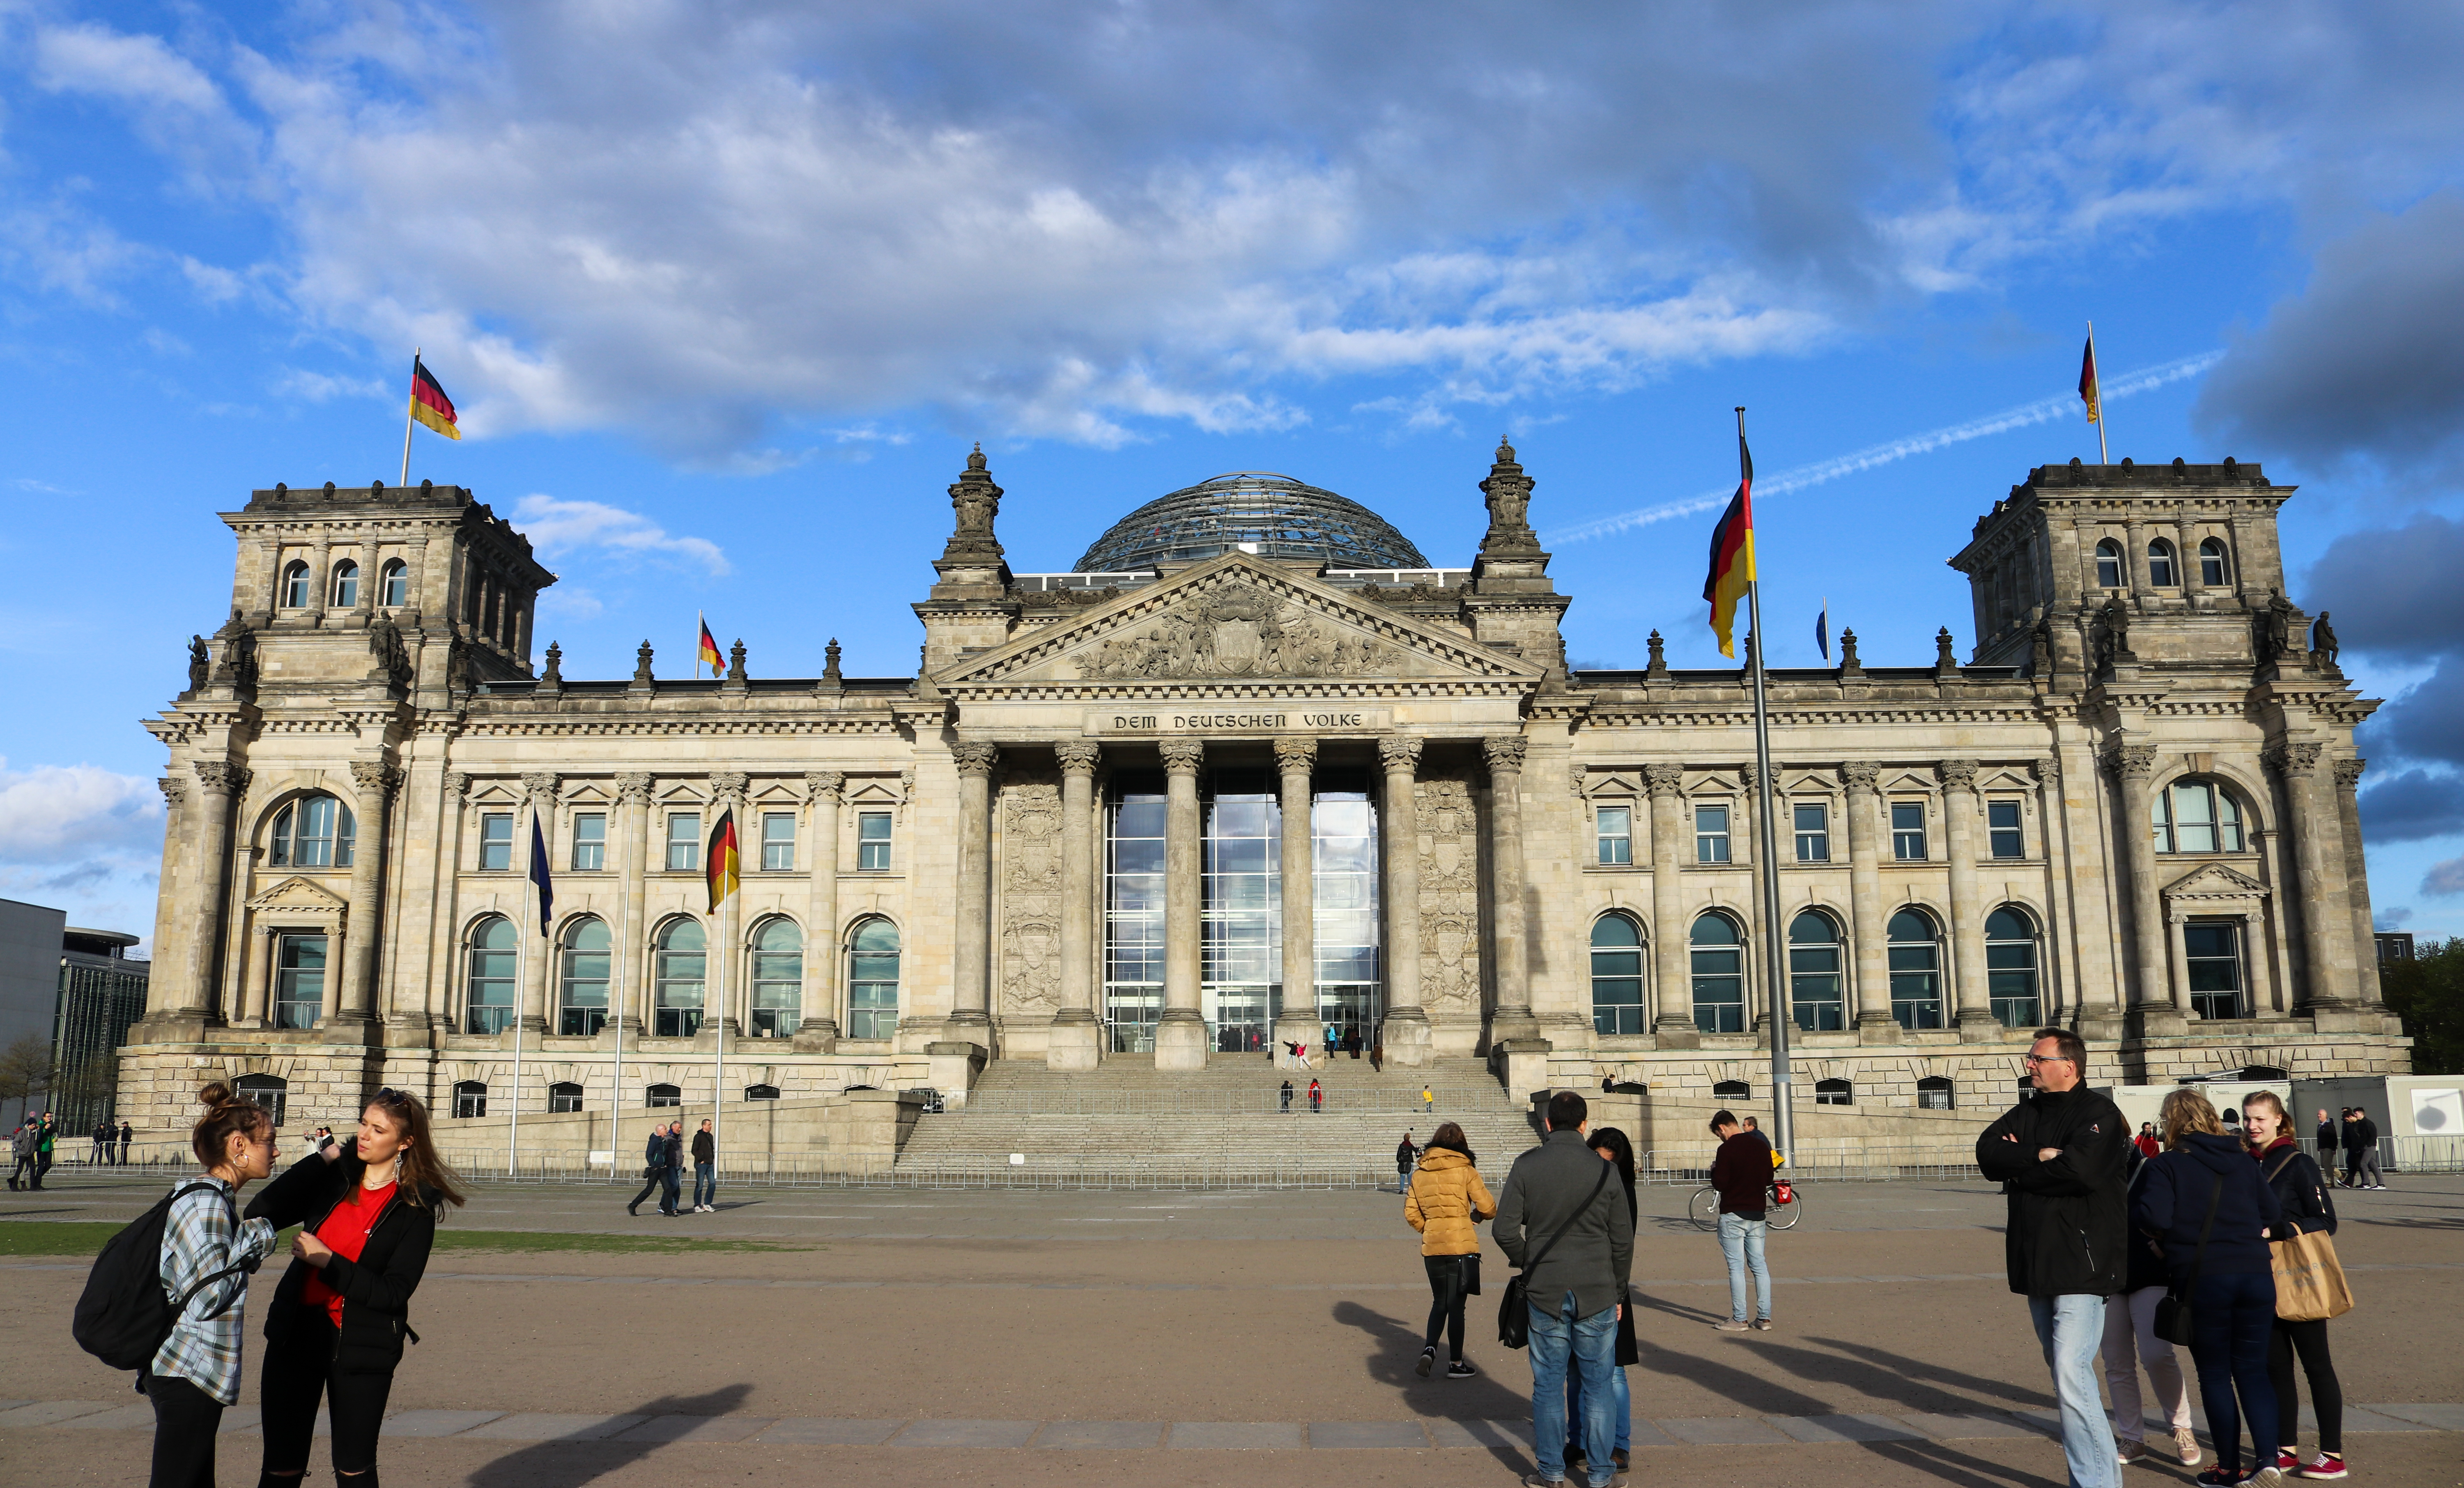 Parliament of Germany (photo credit: Joan / flickr)